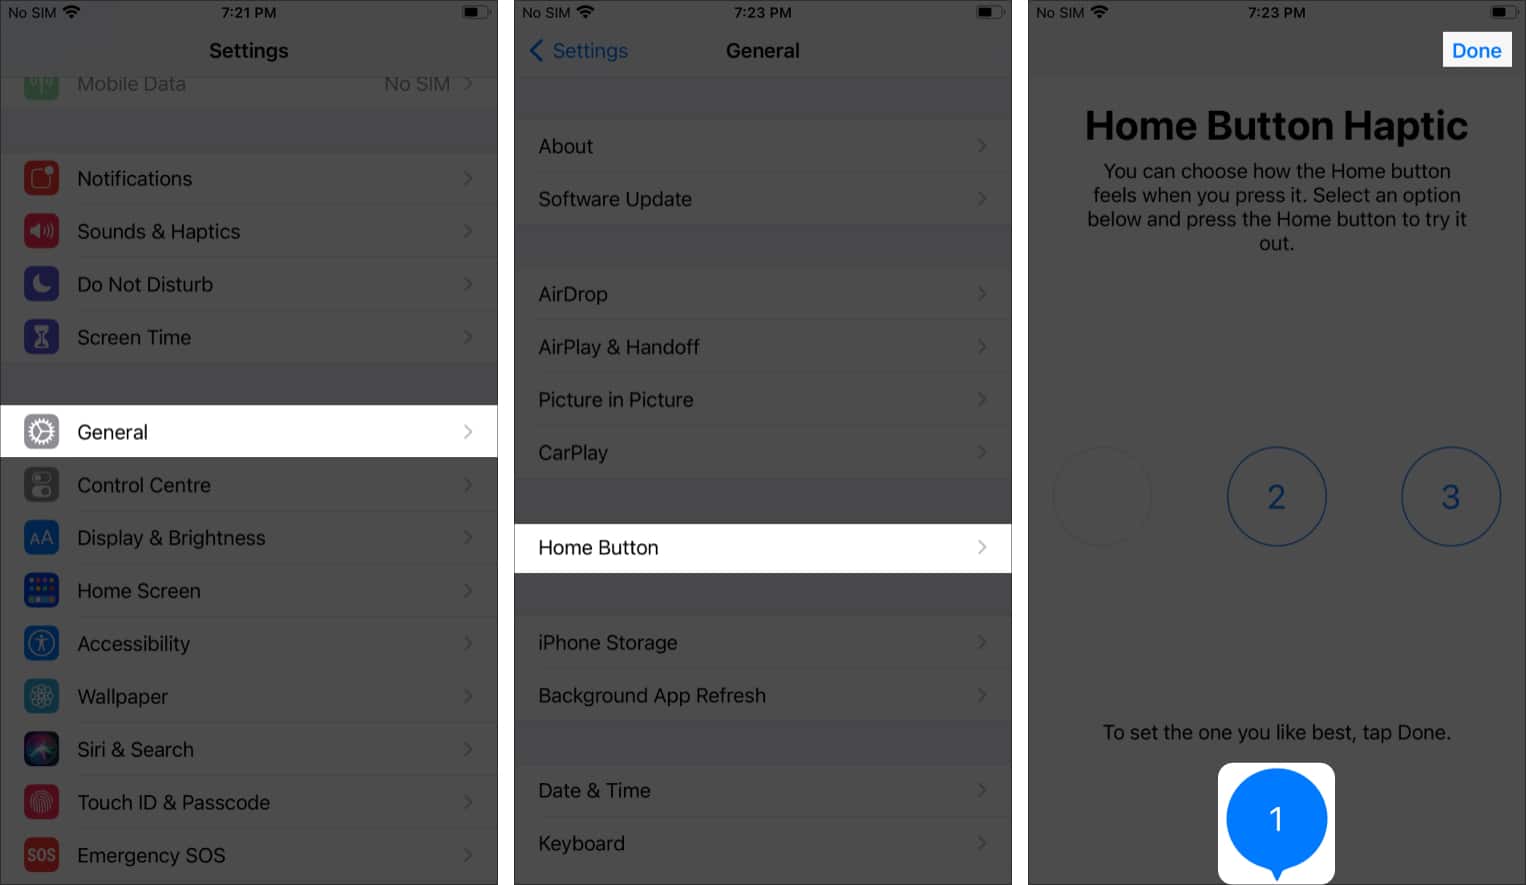 disable home button haptics on iPhone